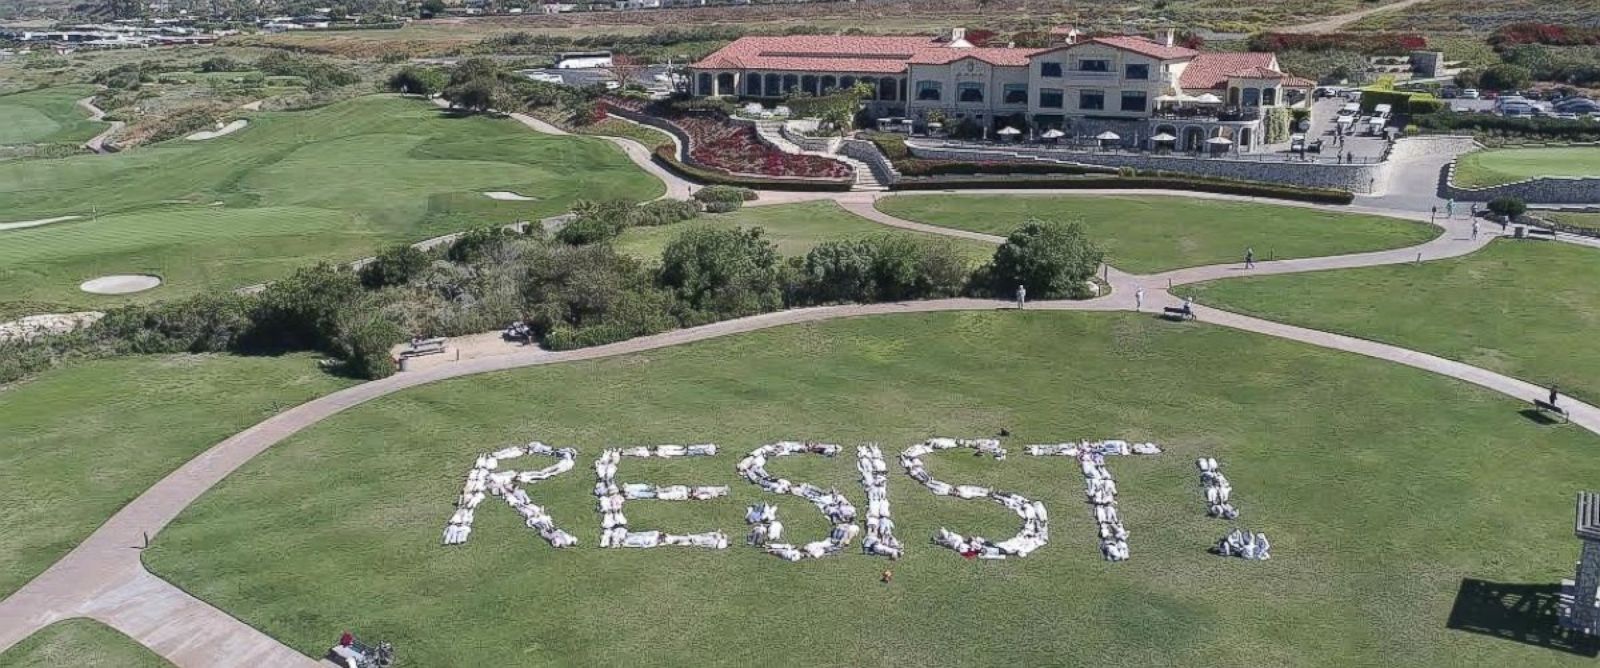 PHOTO: About 200 protesters, part of the group Indivisible San Pedro, spelled out the word "RESIST!" on the ground of the Trump National Golf Club in Rancho Palos Verdes, California, on May 13, 2017.